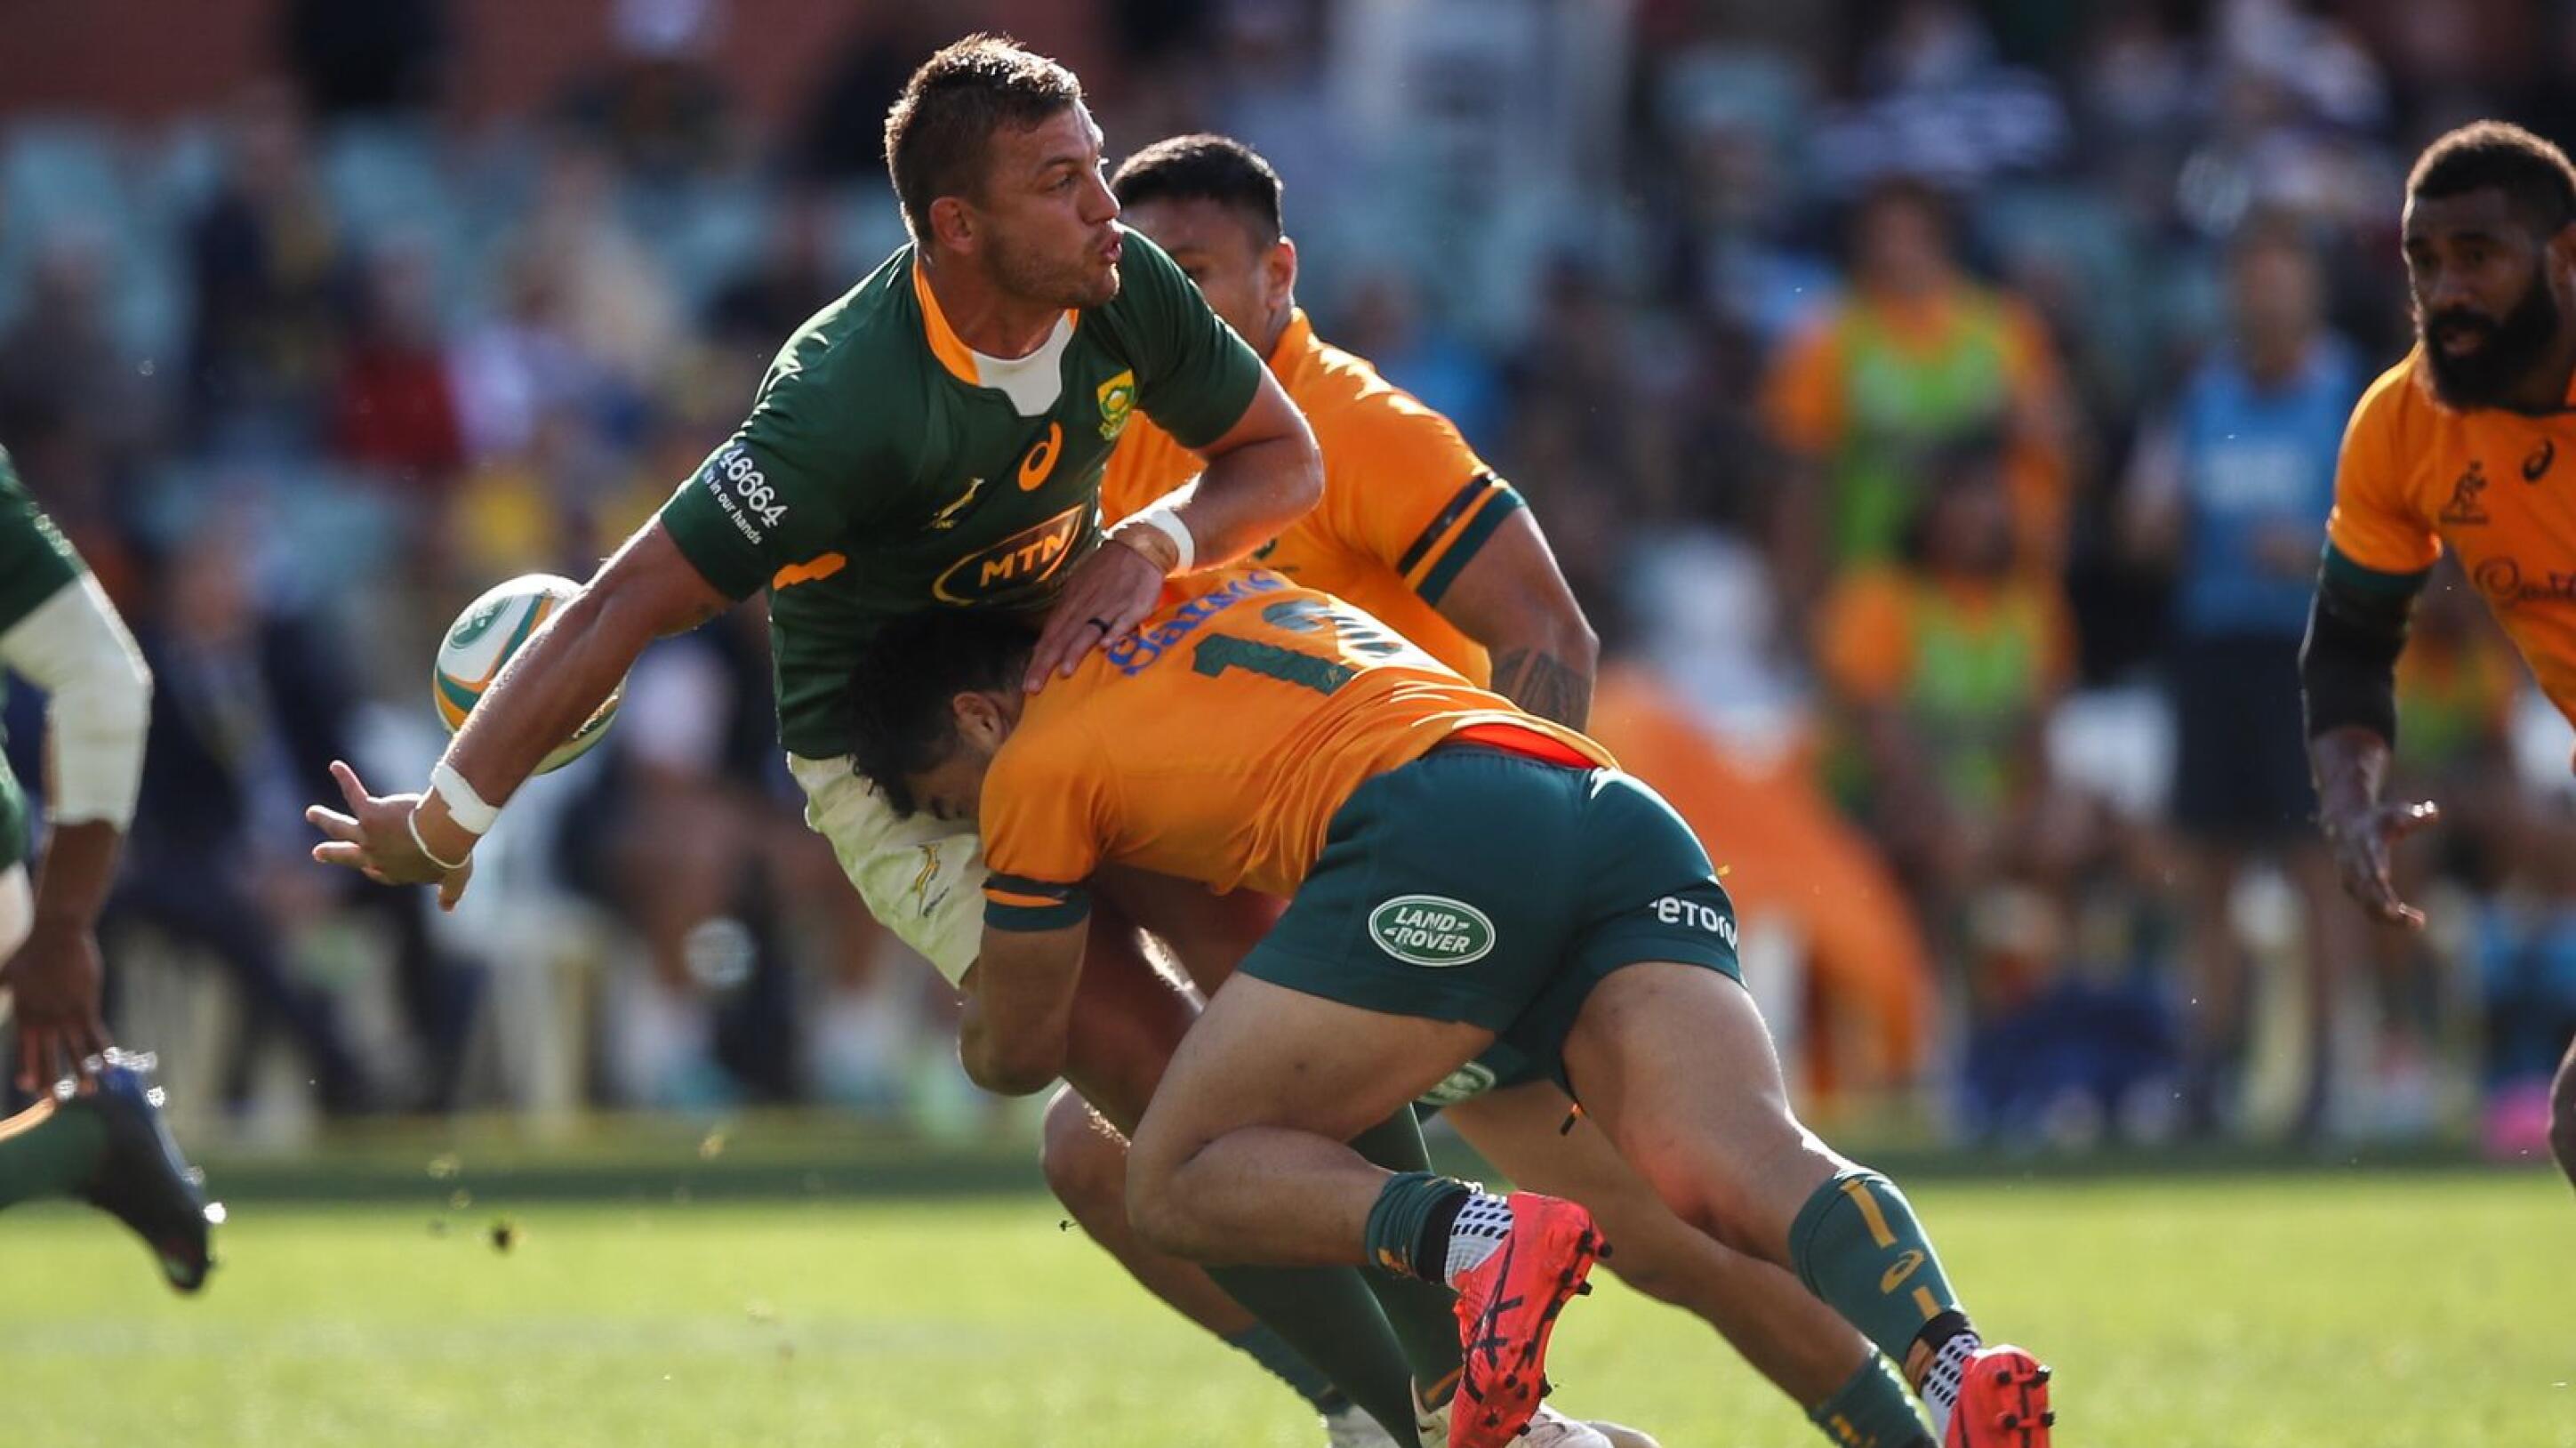 a springbok rugby player is tackled by an Australia rugby player